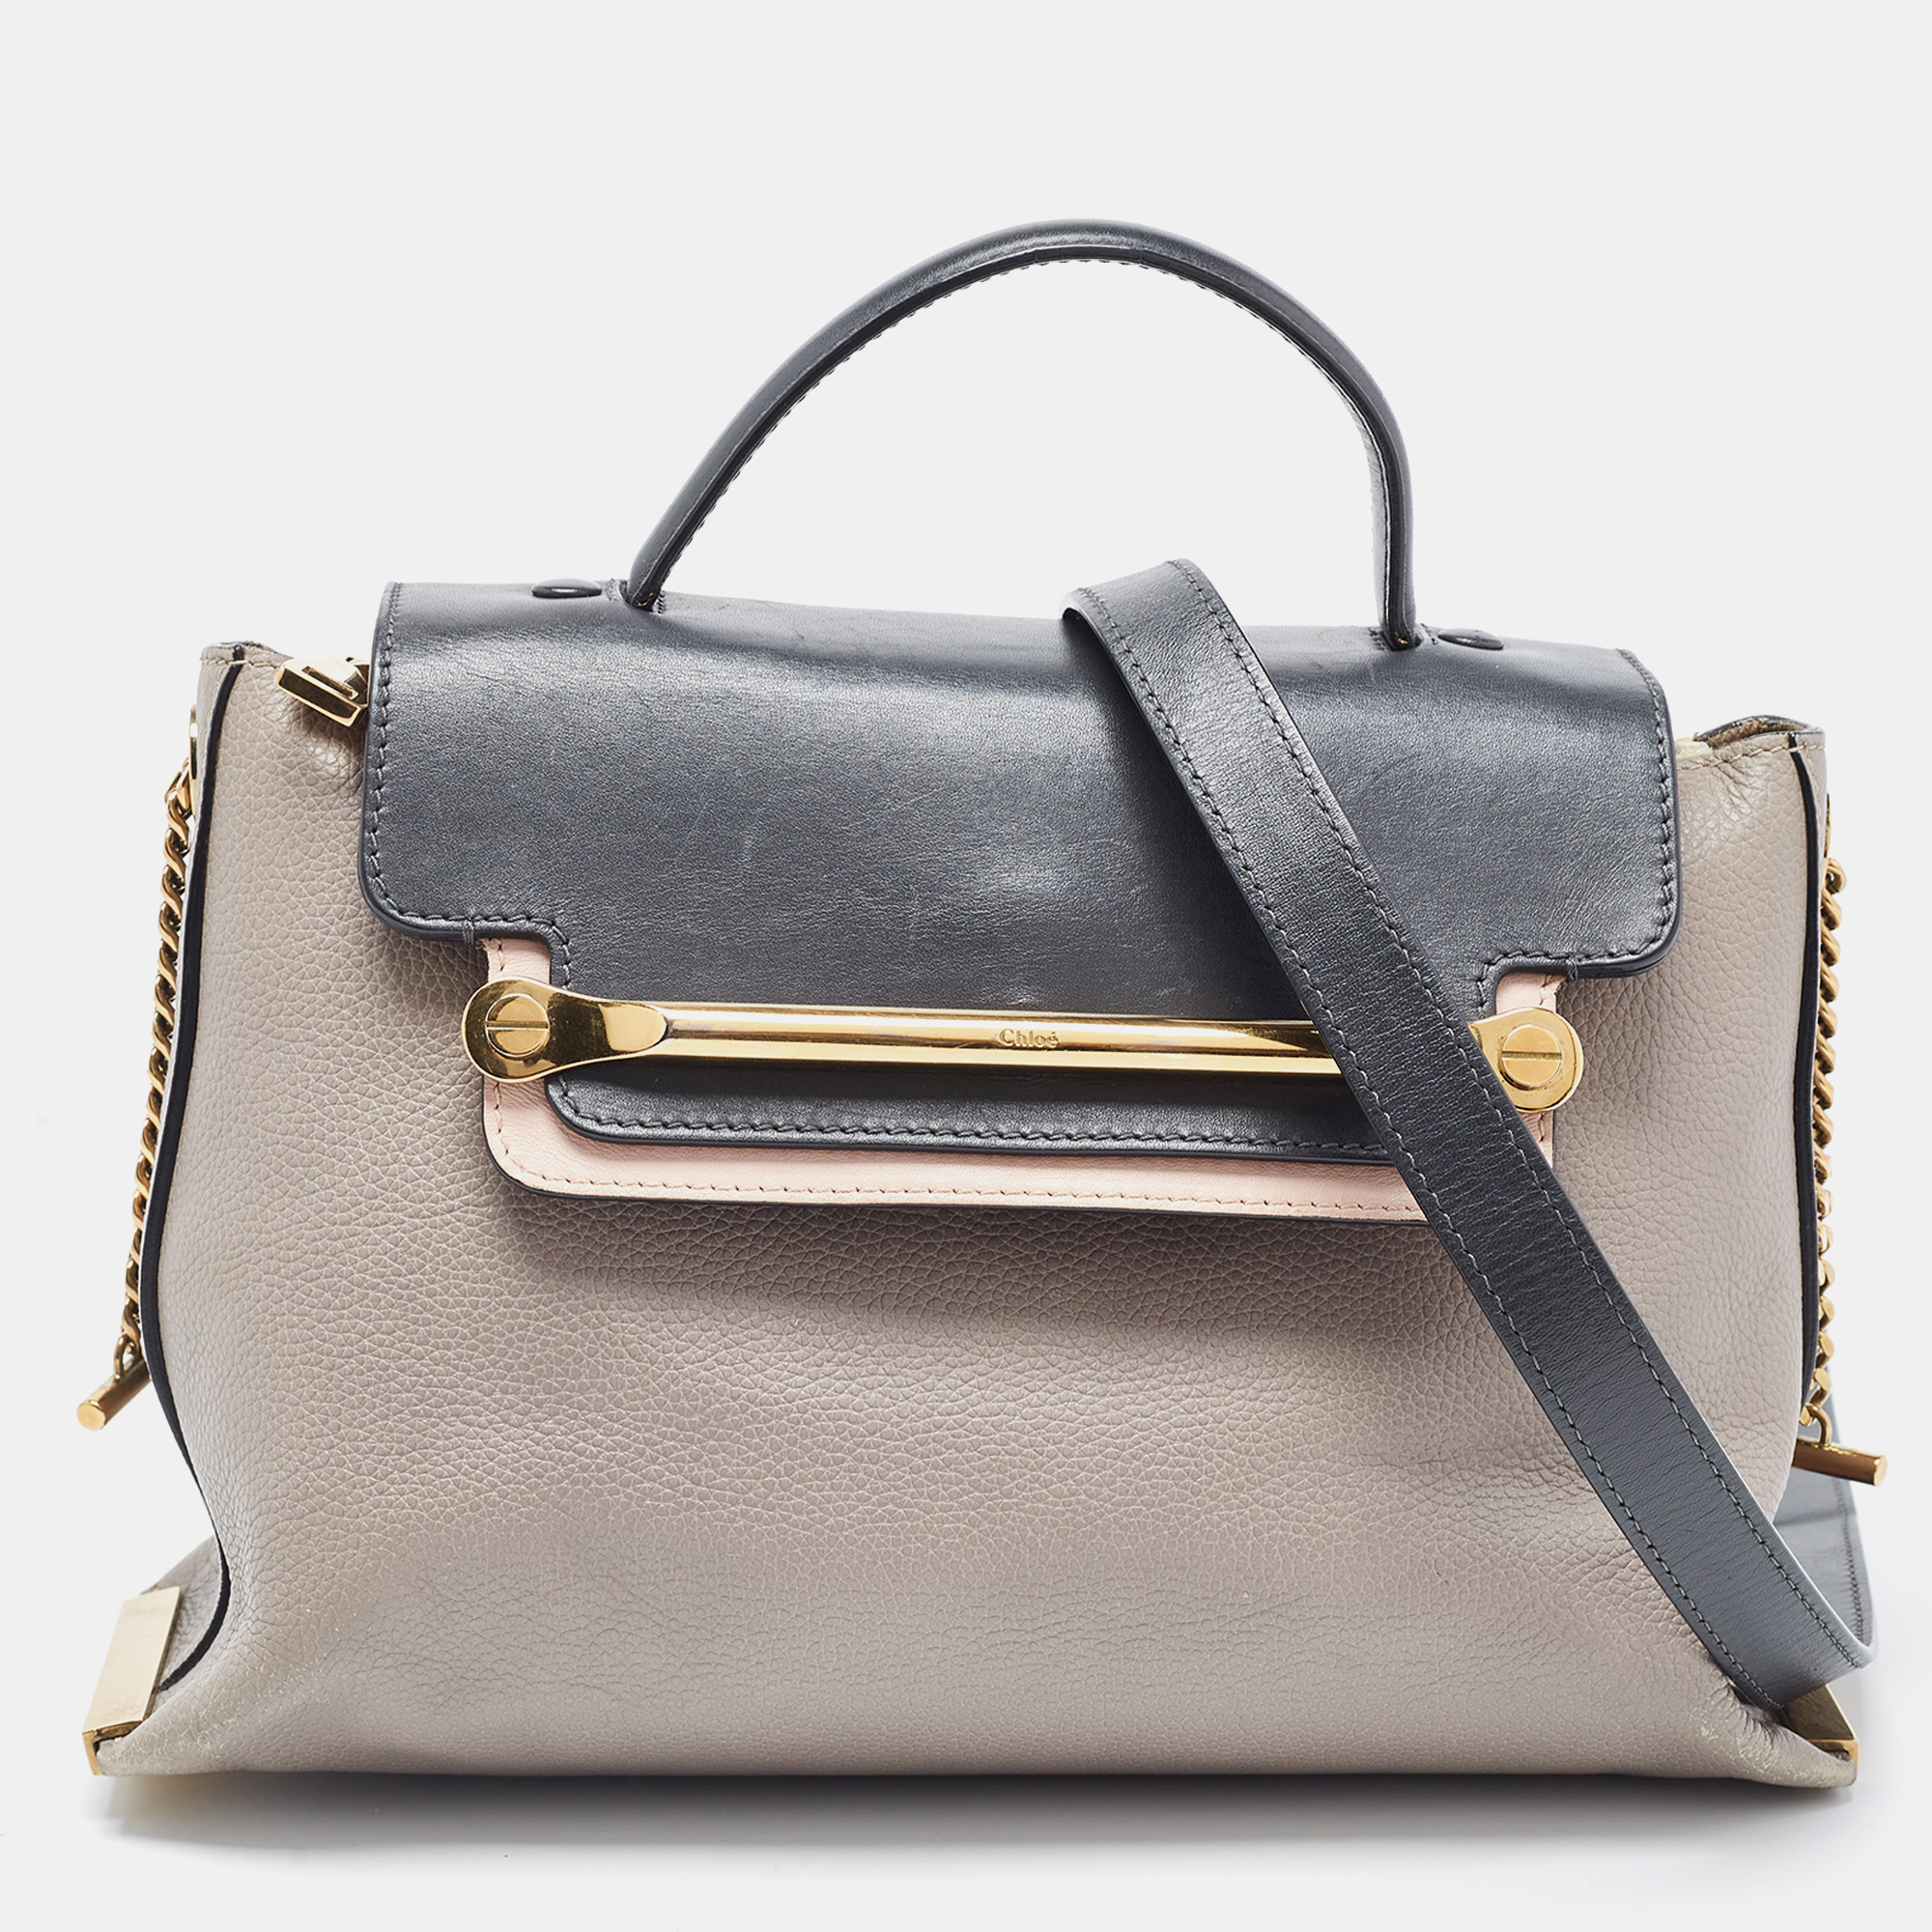 Carefully designed to evoke an expensive and fashionable feel this bag is sure to be a loved purchase. Crafted from leather it features a shoulder strap gold tone metal tips on the corners and a metal bar on the flap. The interior is lined with leather and houses a zip pocket.